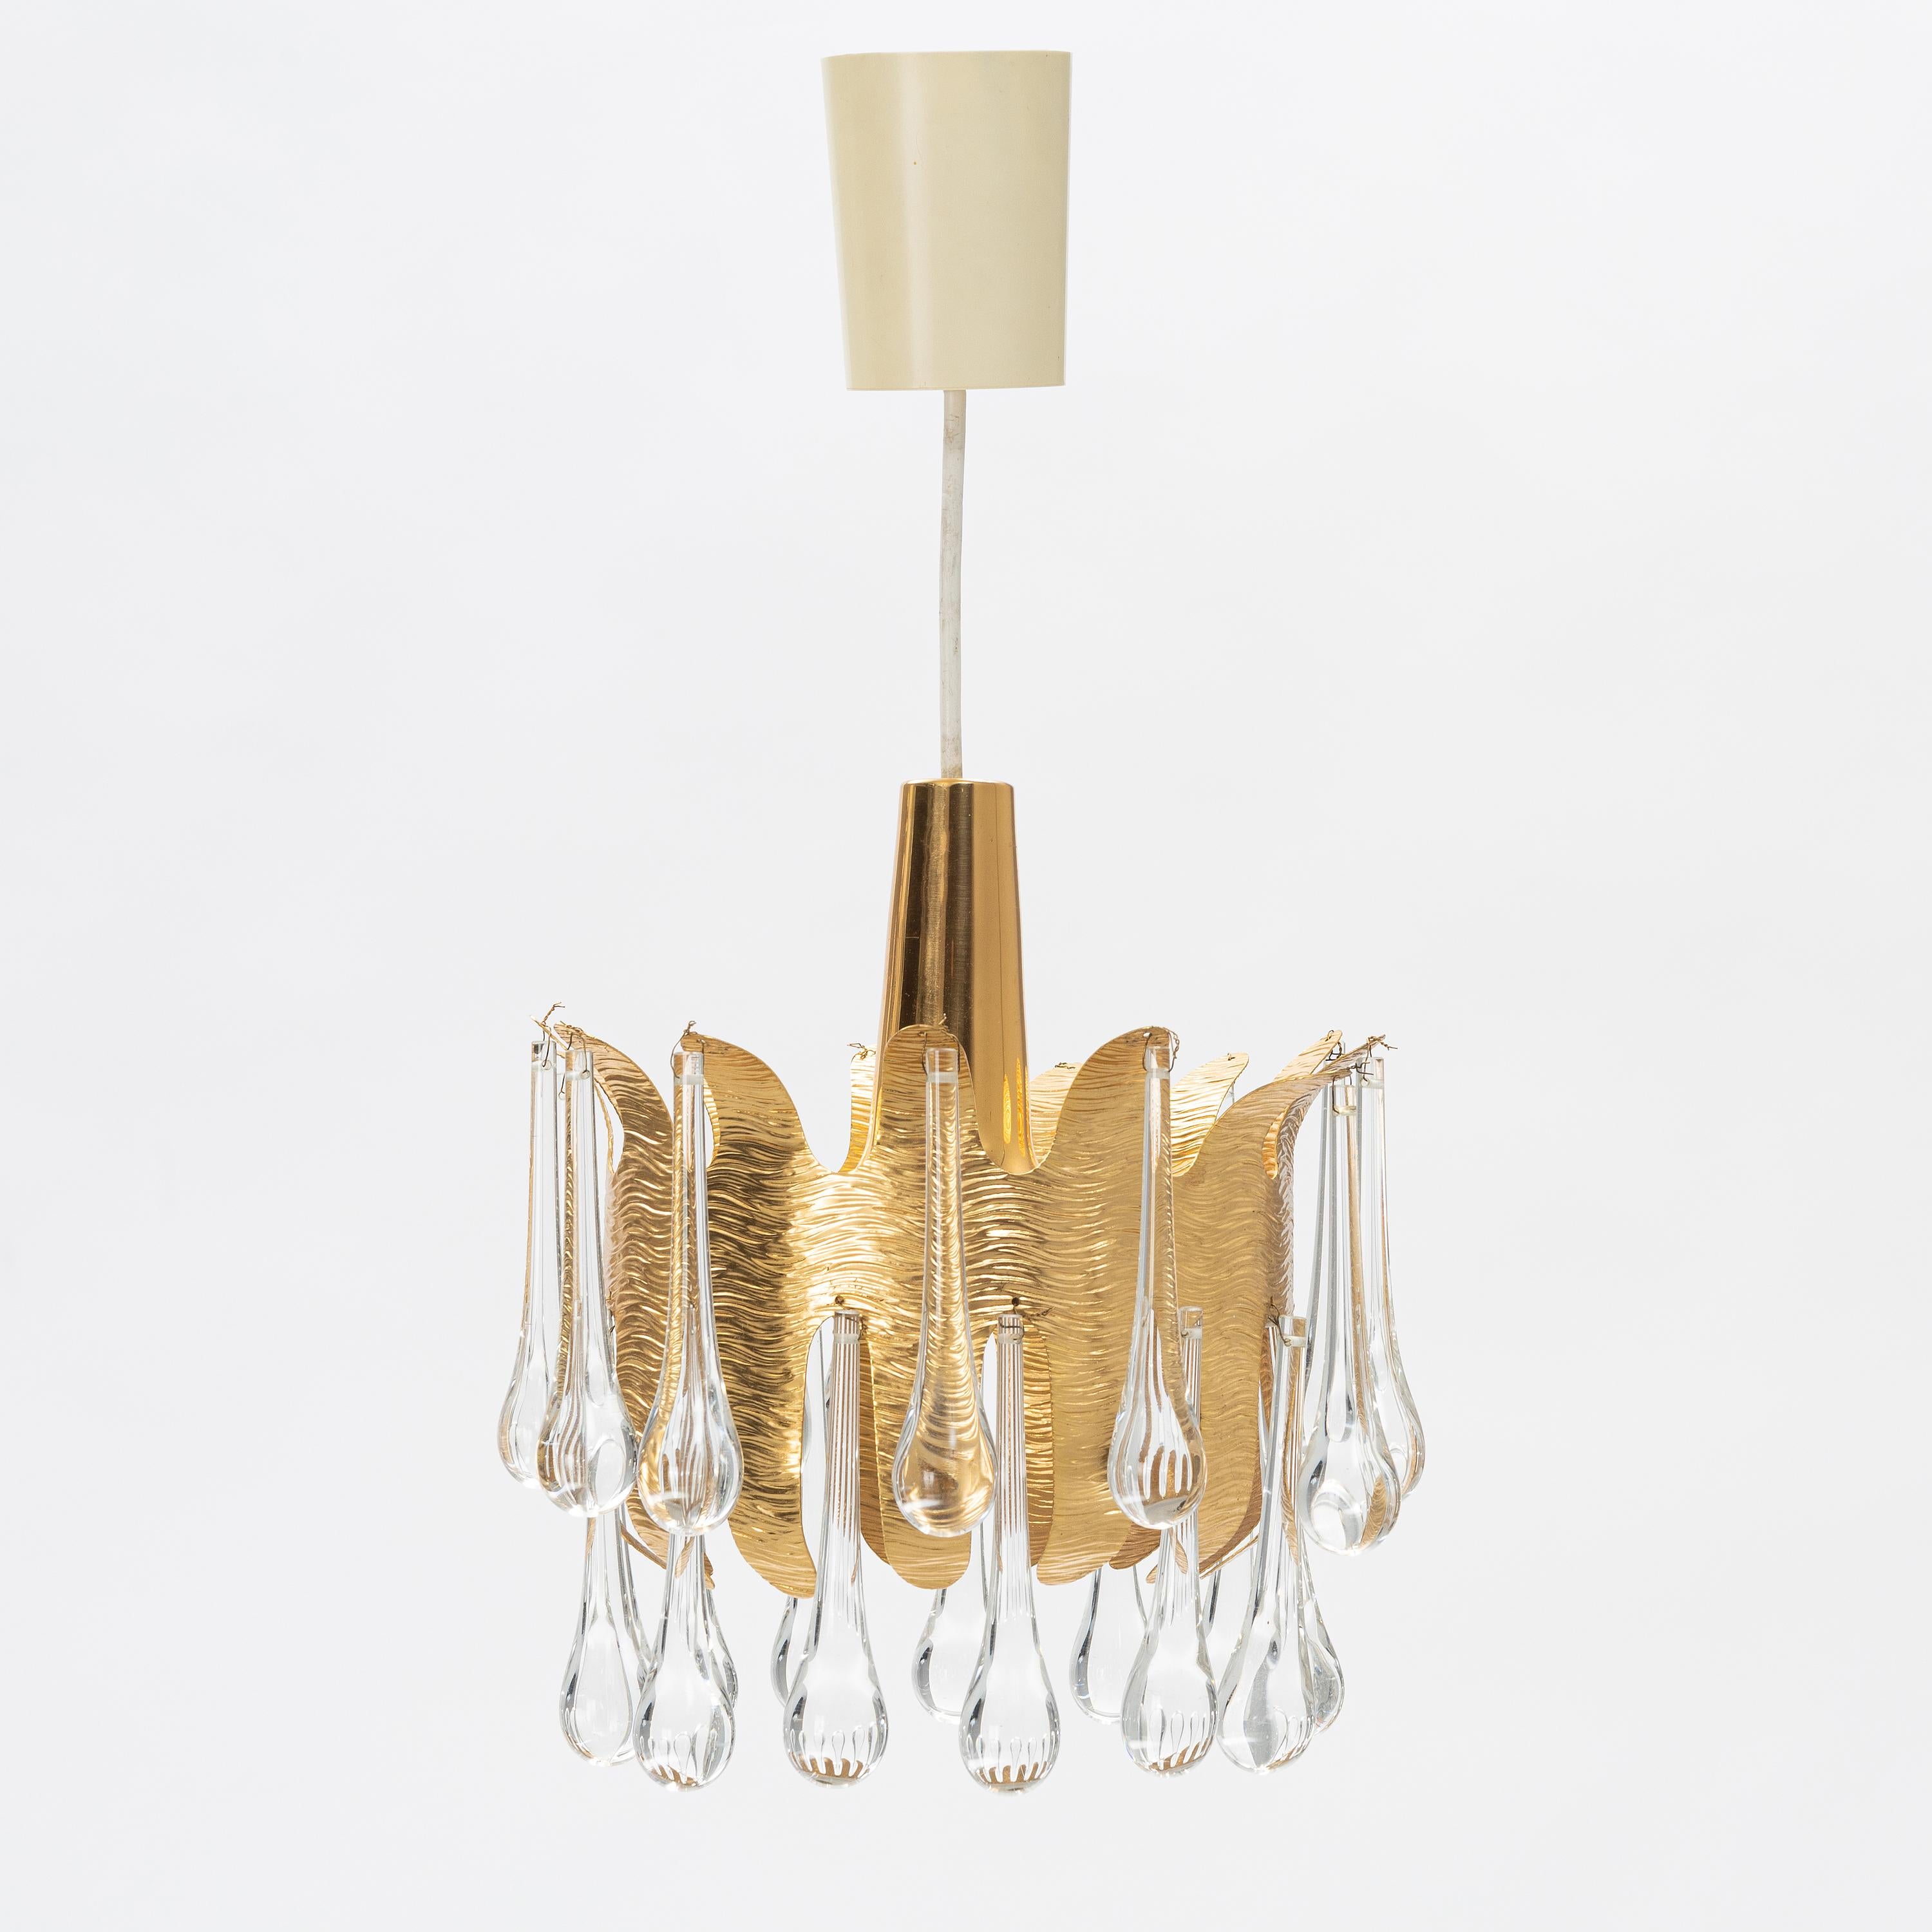 20th Century Palwa Palme & Walter ceiling lamp golden brass and Glass, Germany 1970's. For Sale